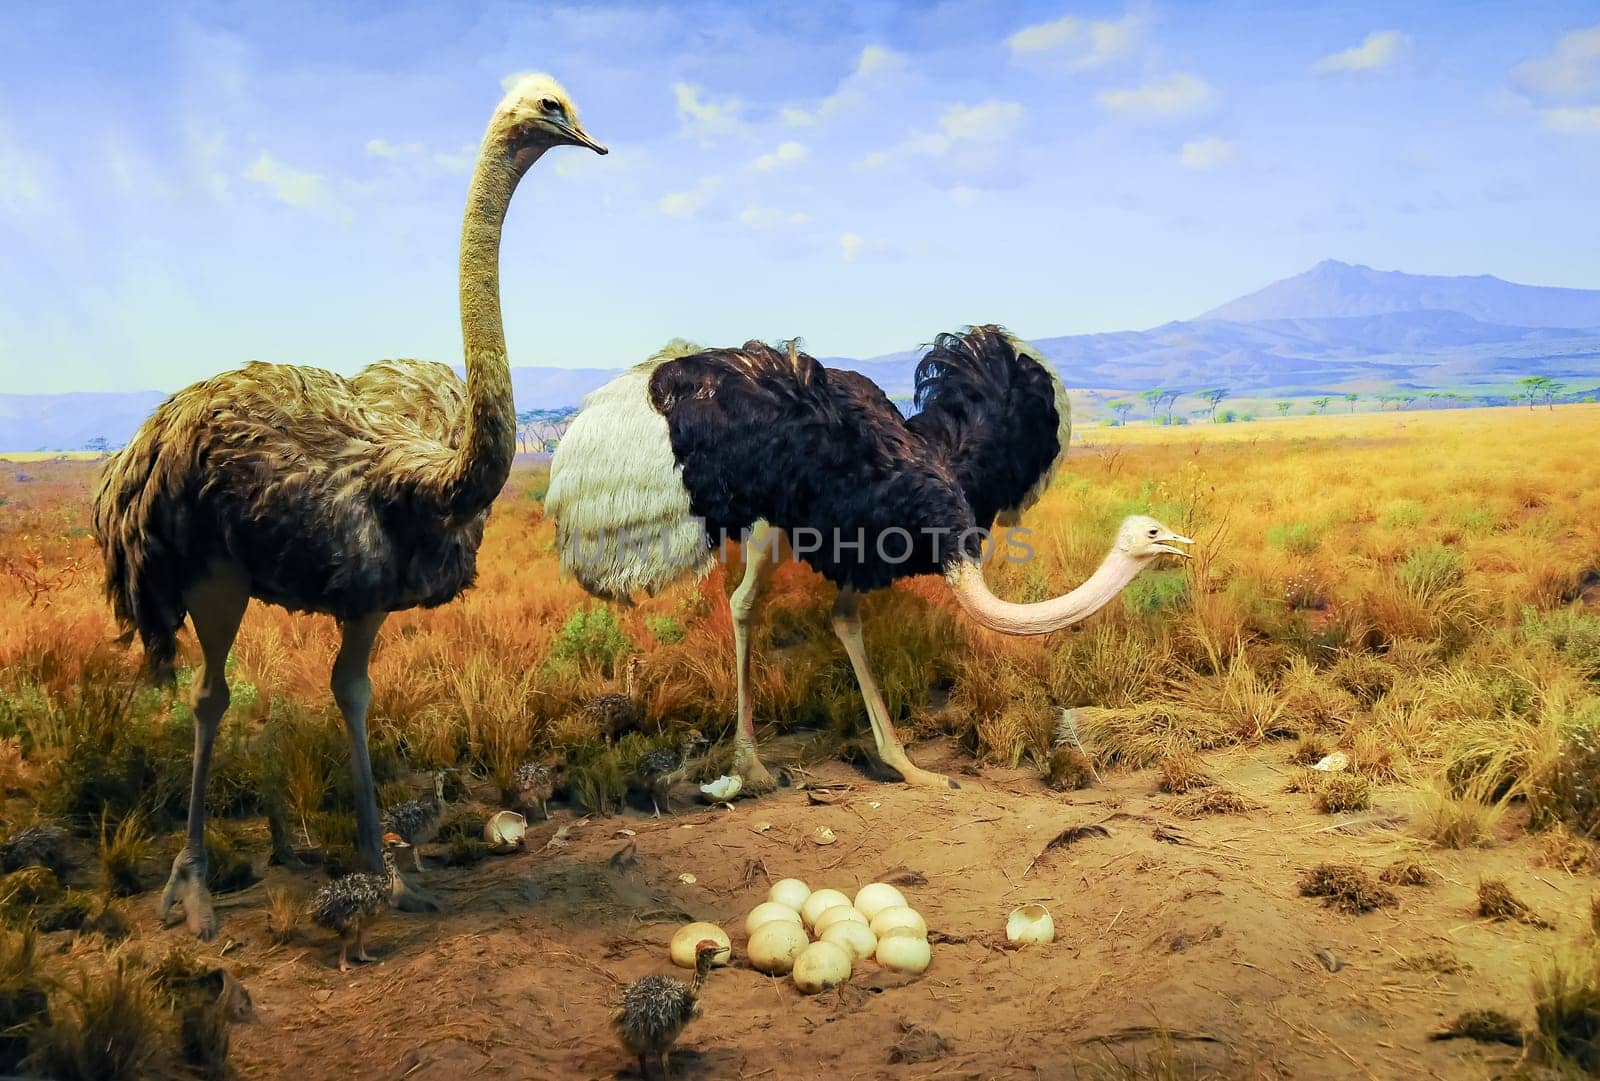 NEW YORK, USA - DECEMBER 05, 2011: A male and female ostrich near a nest of eggs in an exhibit at the Museum of National History, USA by Hydrobiolog